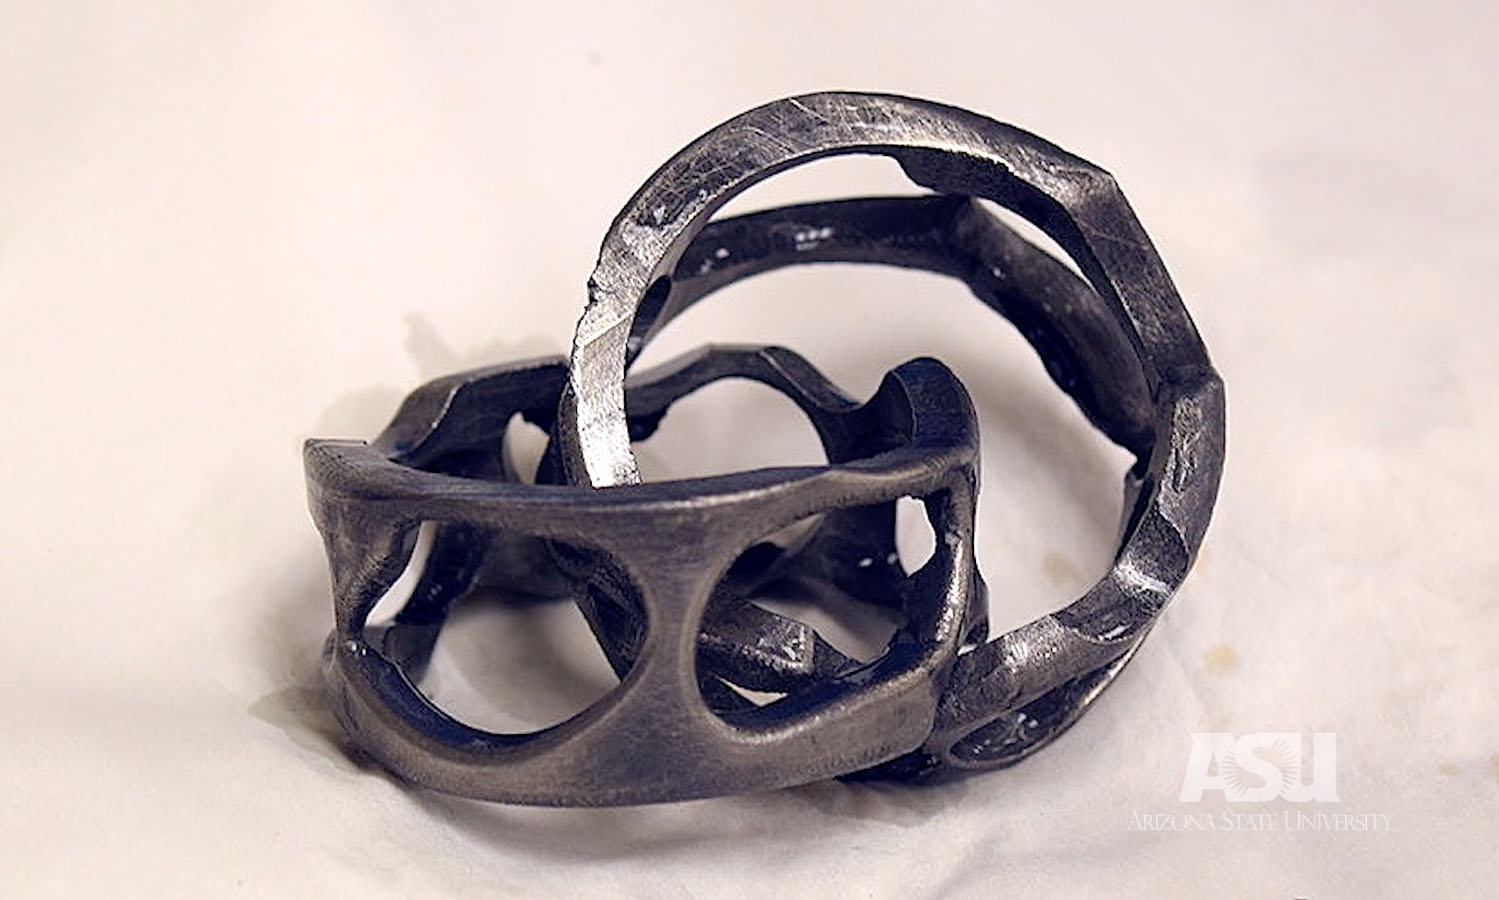 Metal 3D Printing: Dissolvable 3D printed supports